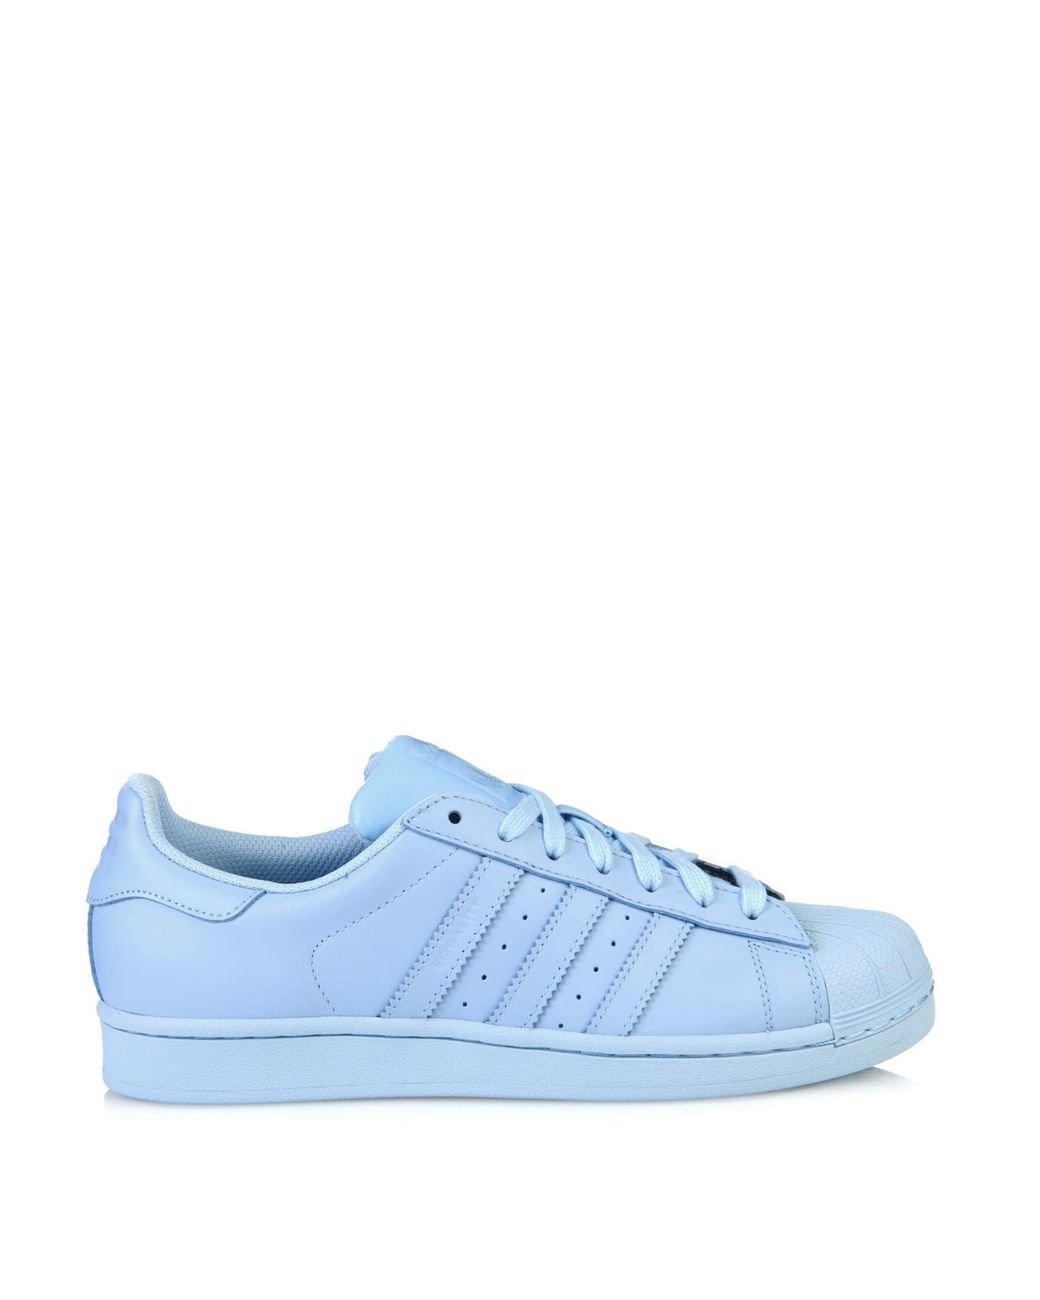 adidas Superstar Supercolor Leather Trainers in Blue | Lyst